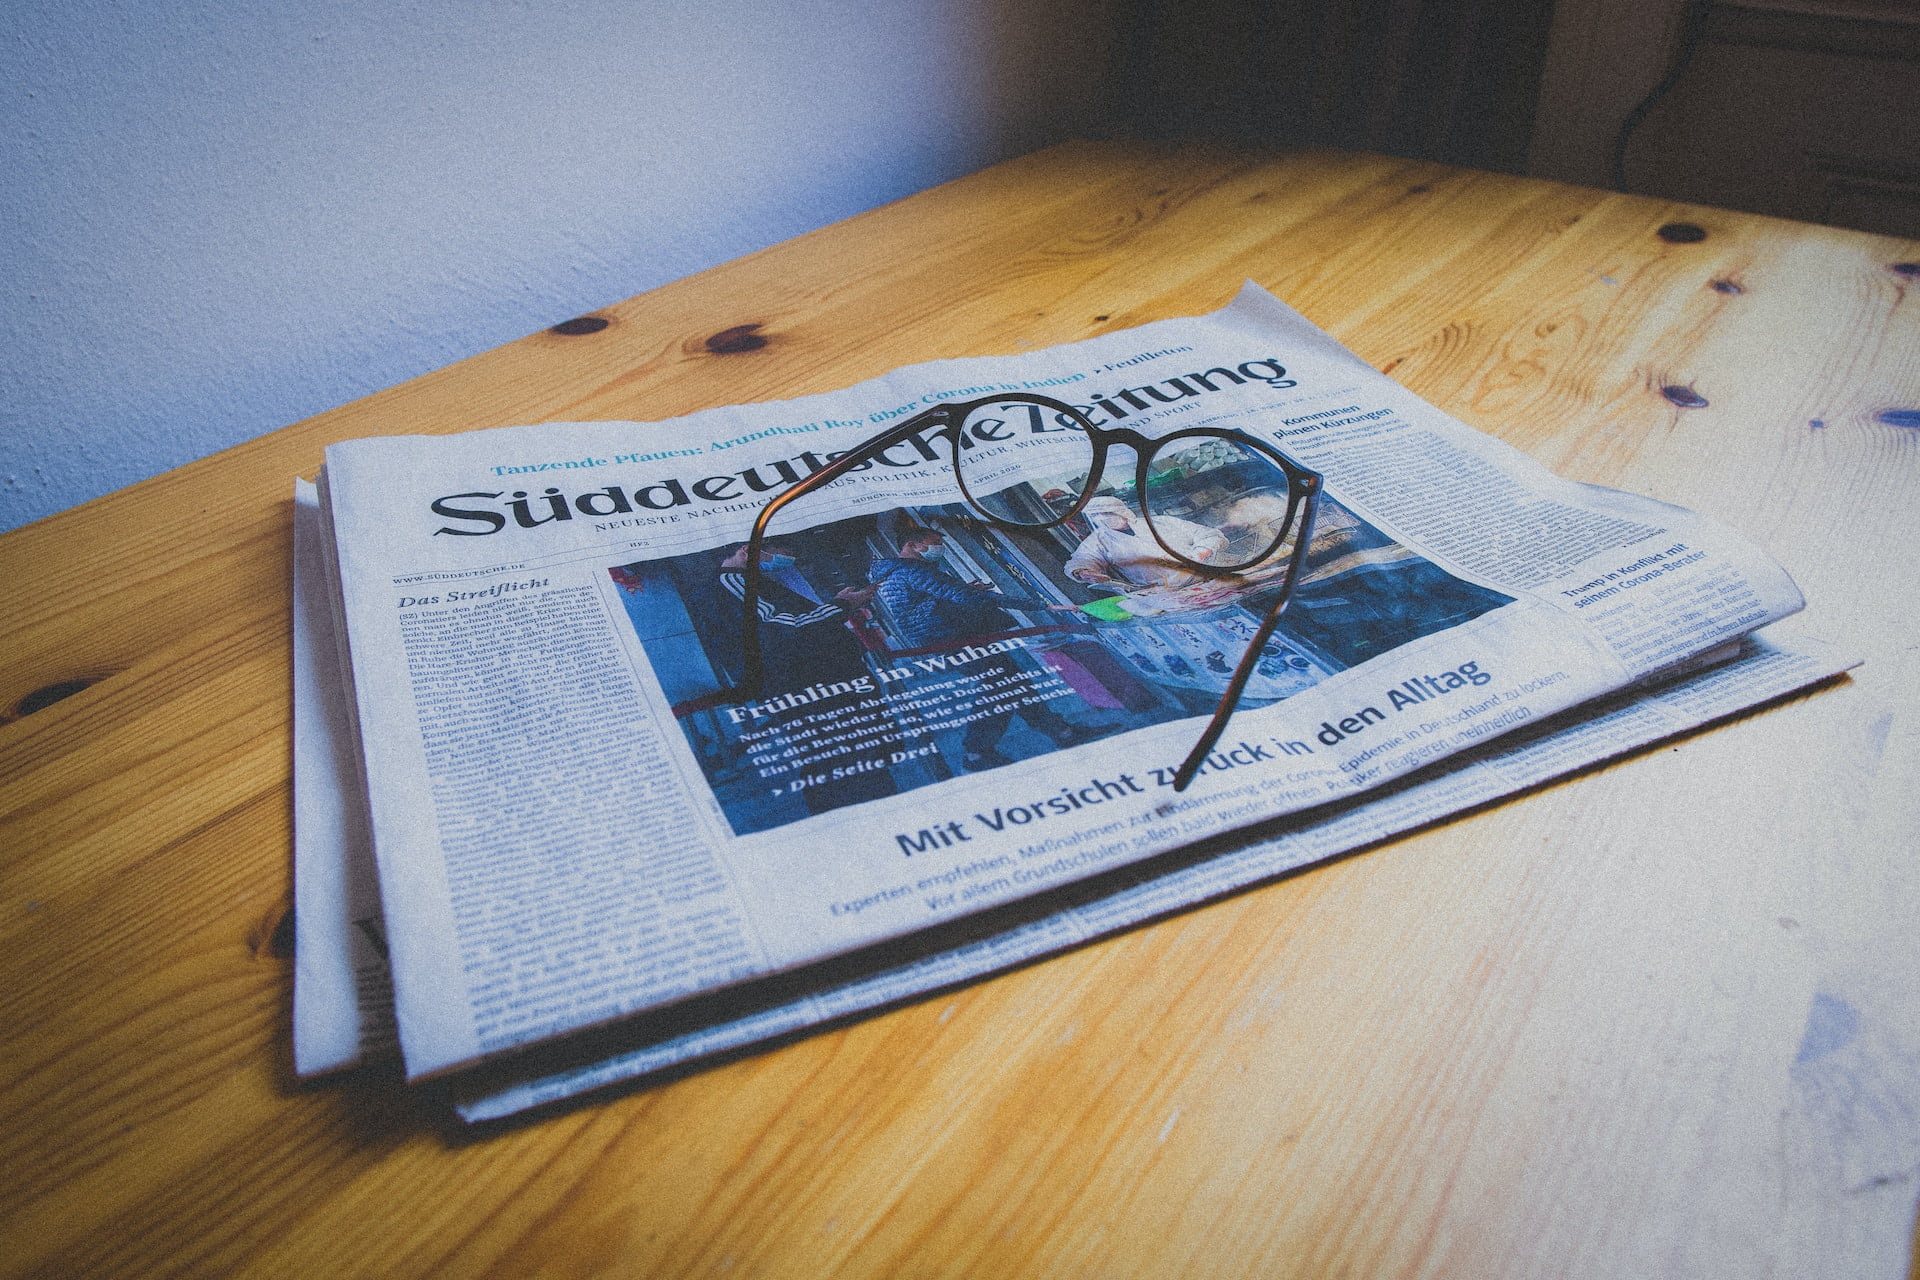 Depicts a newspaper on a table near a pair of glasses. Used for a roundup of alternative investment news.